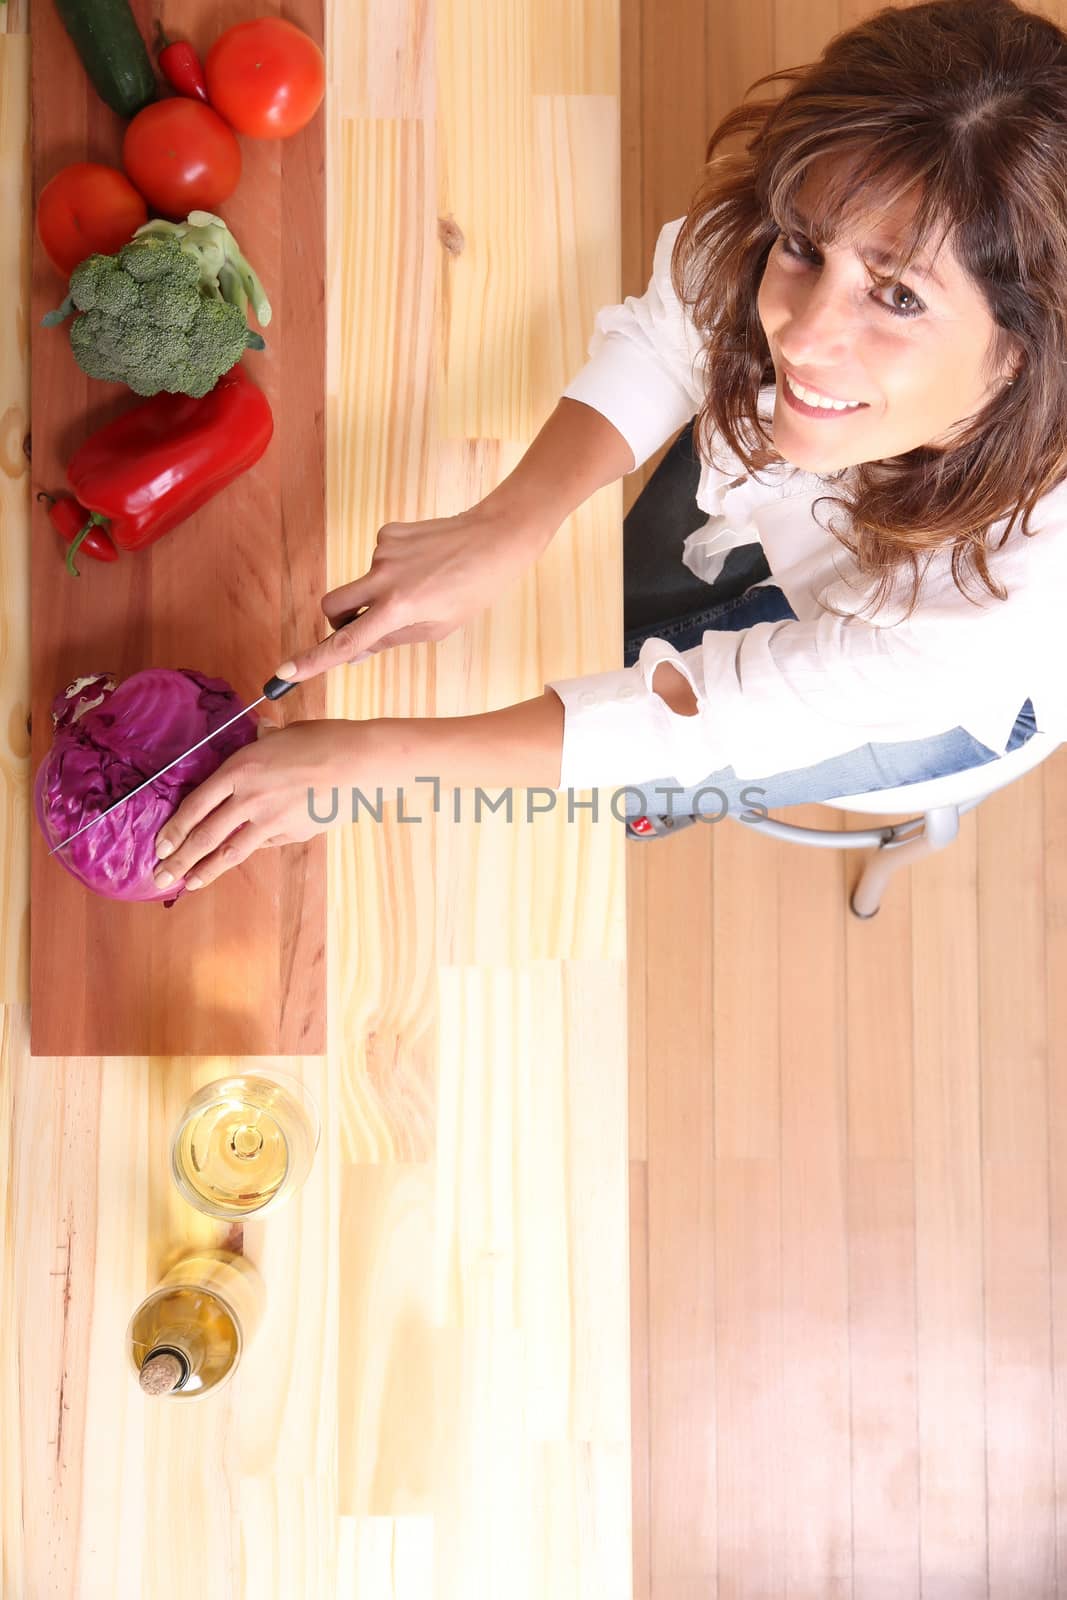 A beautiful mature woman cutting vegetables in the kitchen.